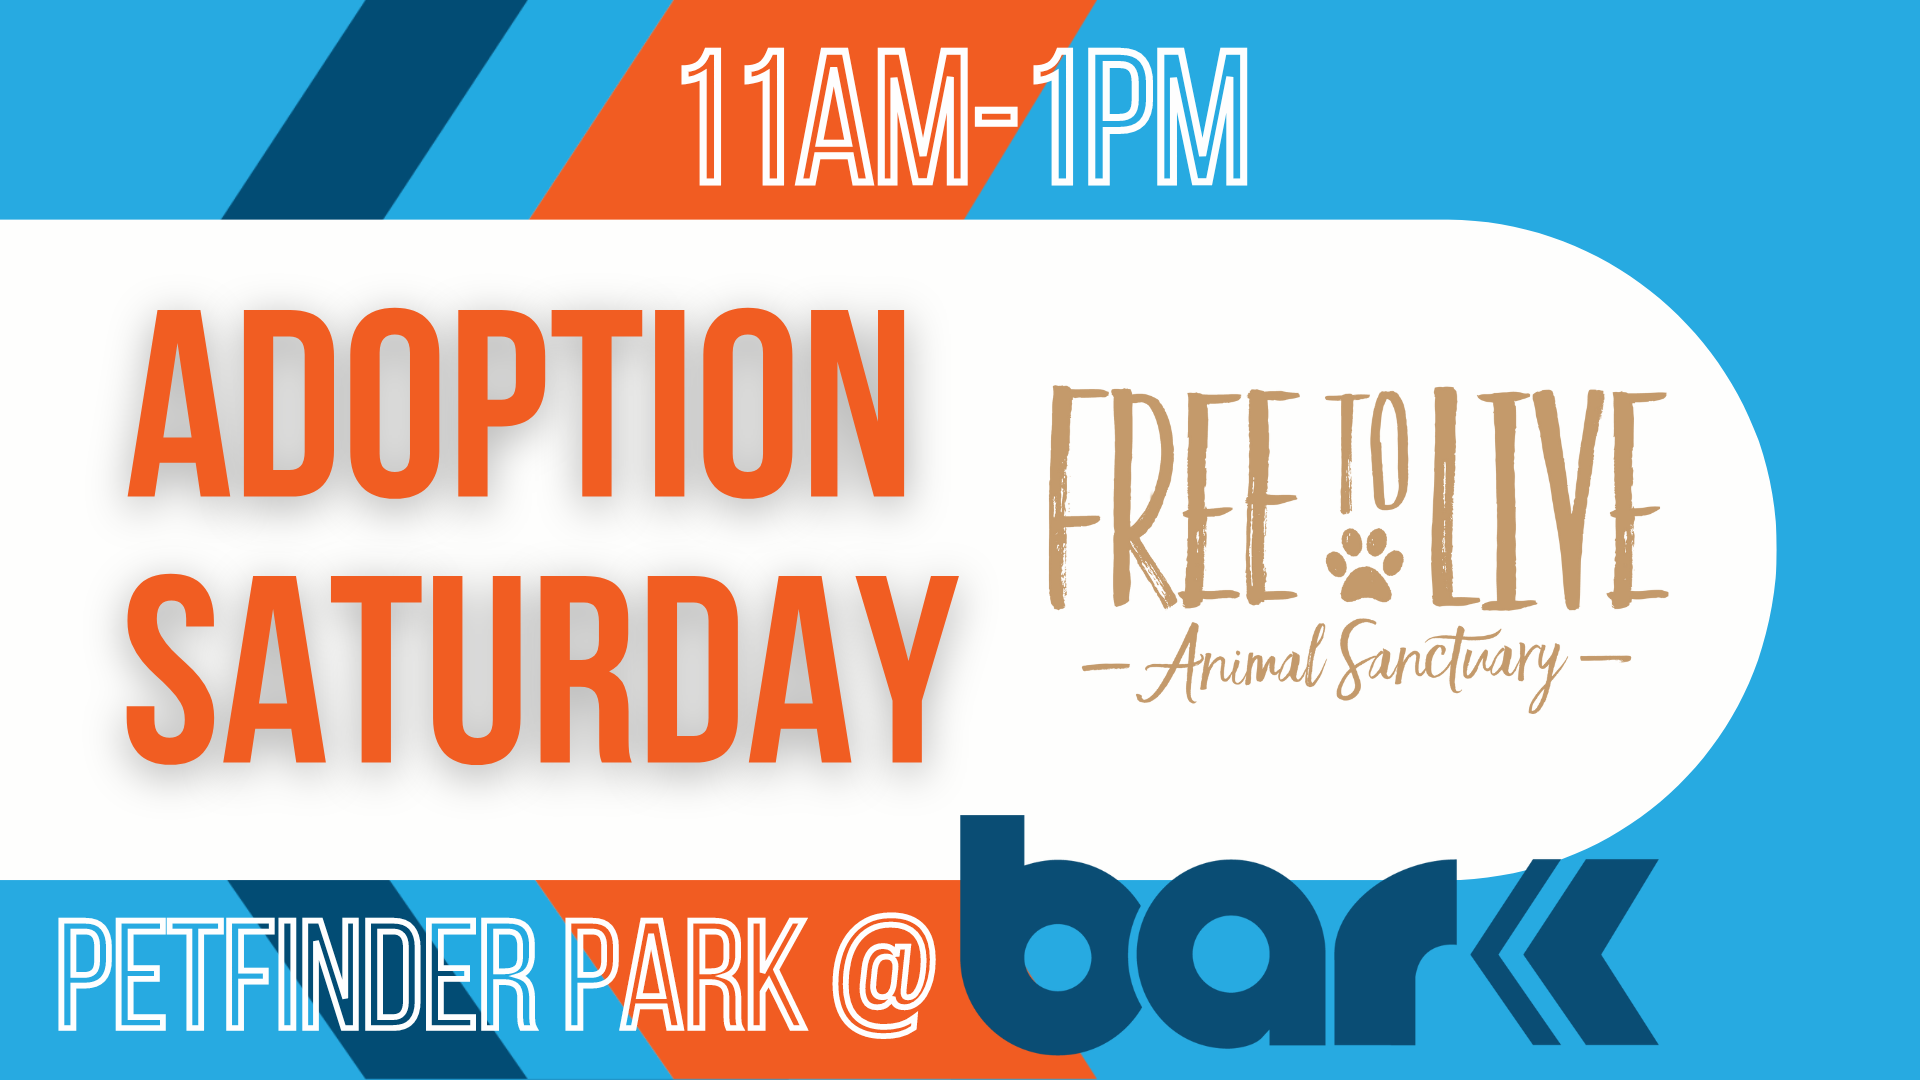 Petfinder Park at Bar K. Adoption Saturday with Free to Live Animal Sanctuary from 11 am to 1 pm